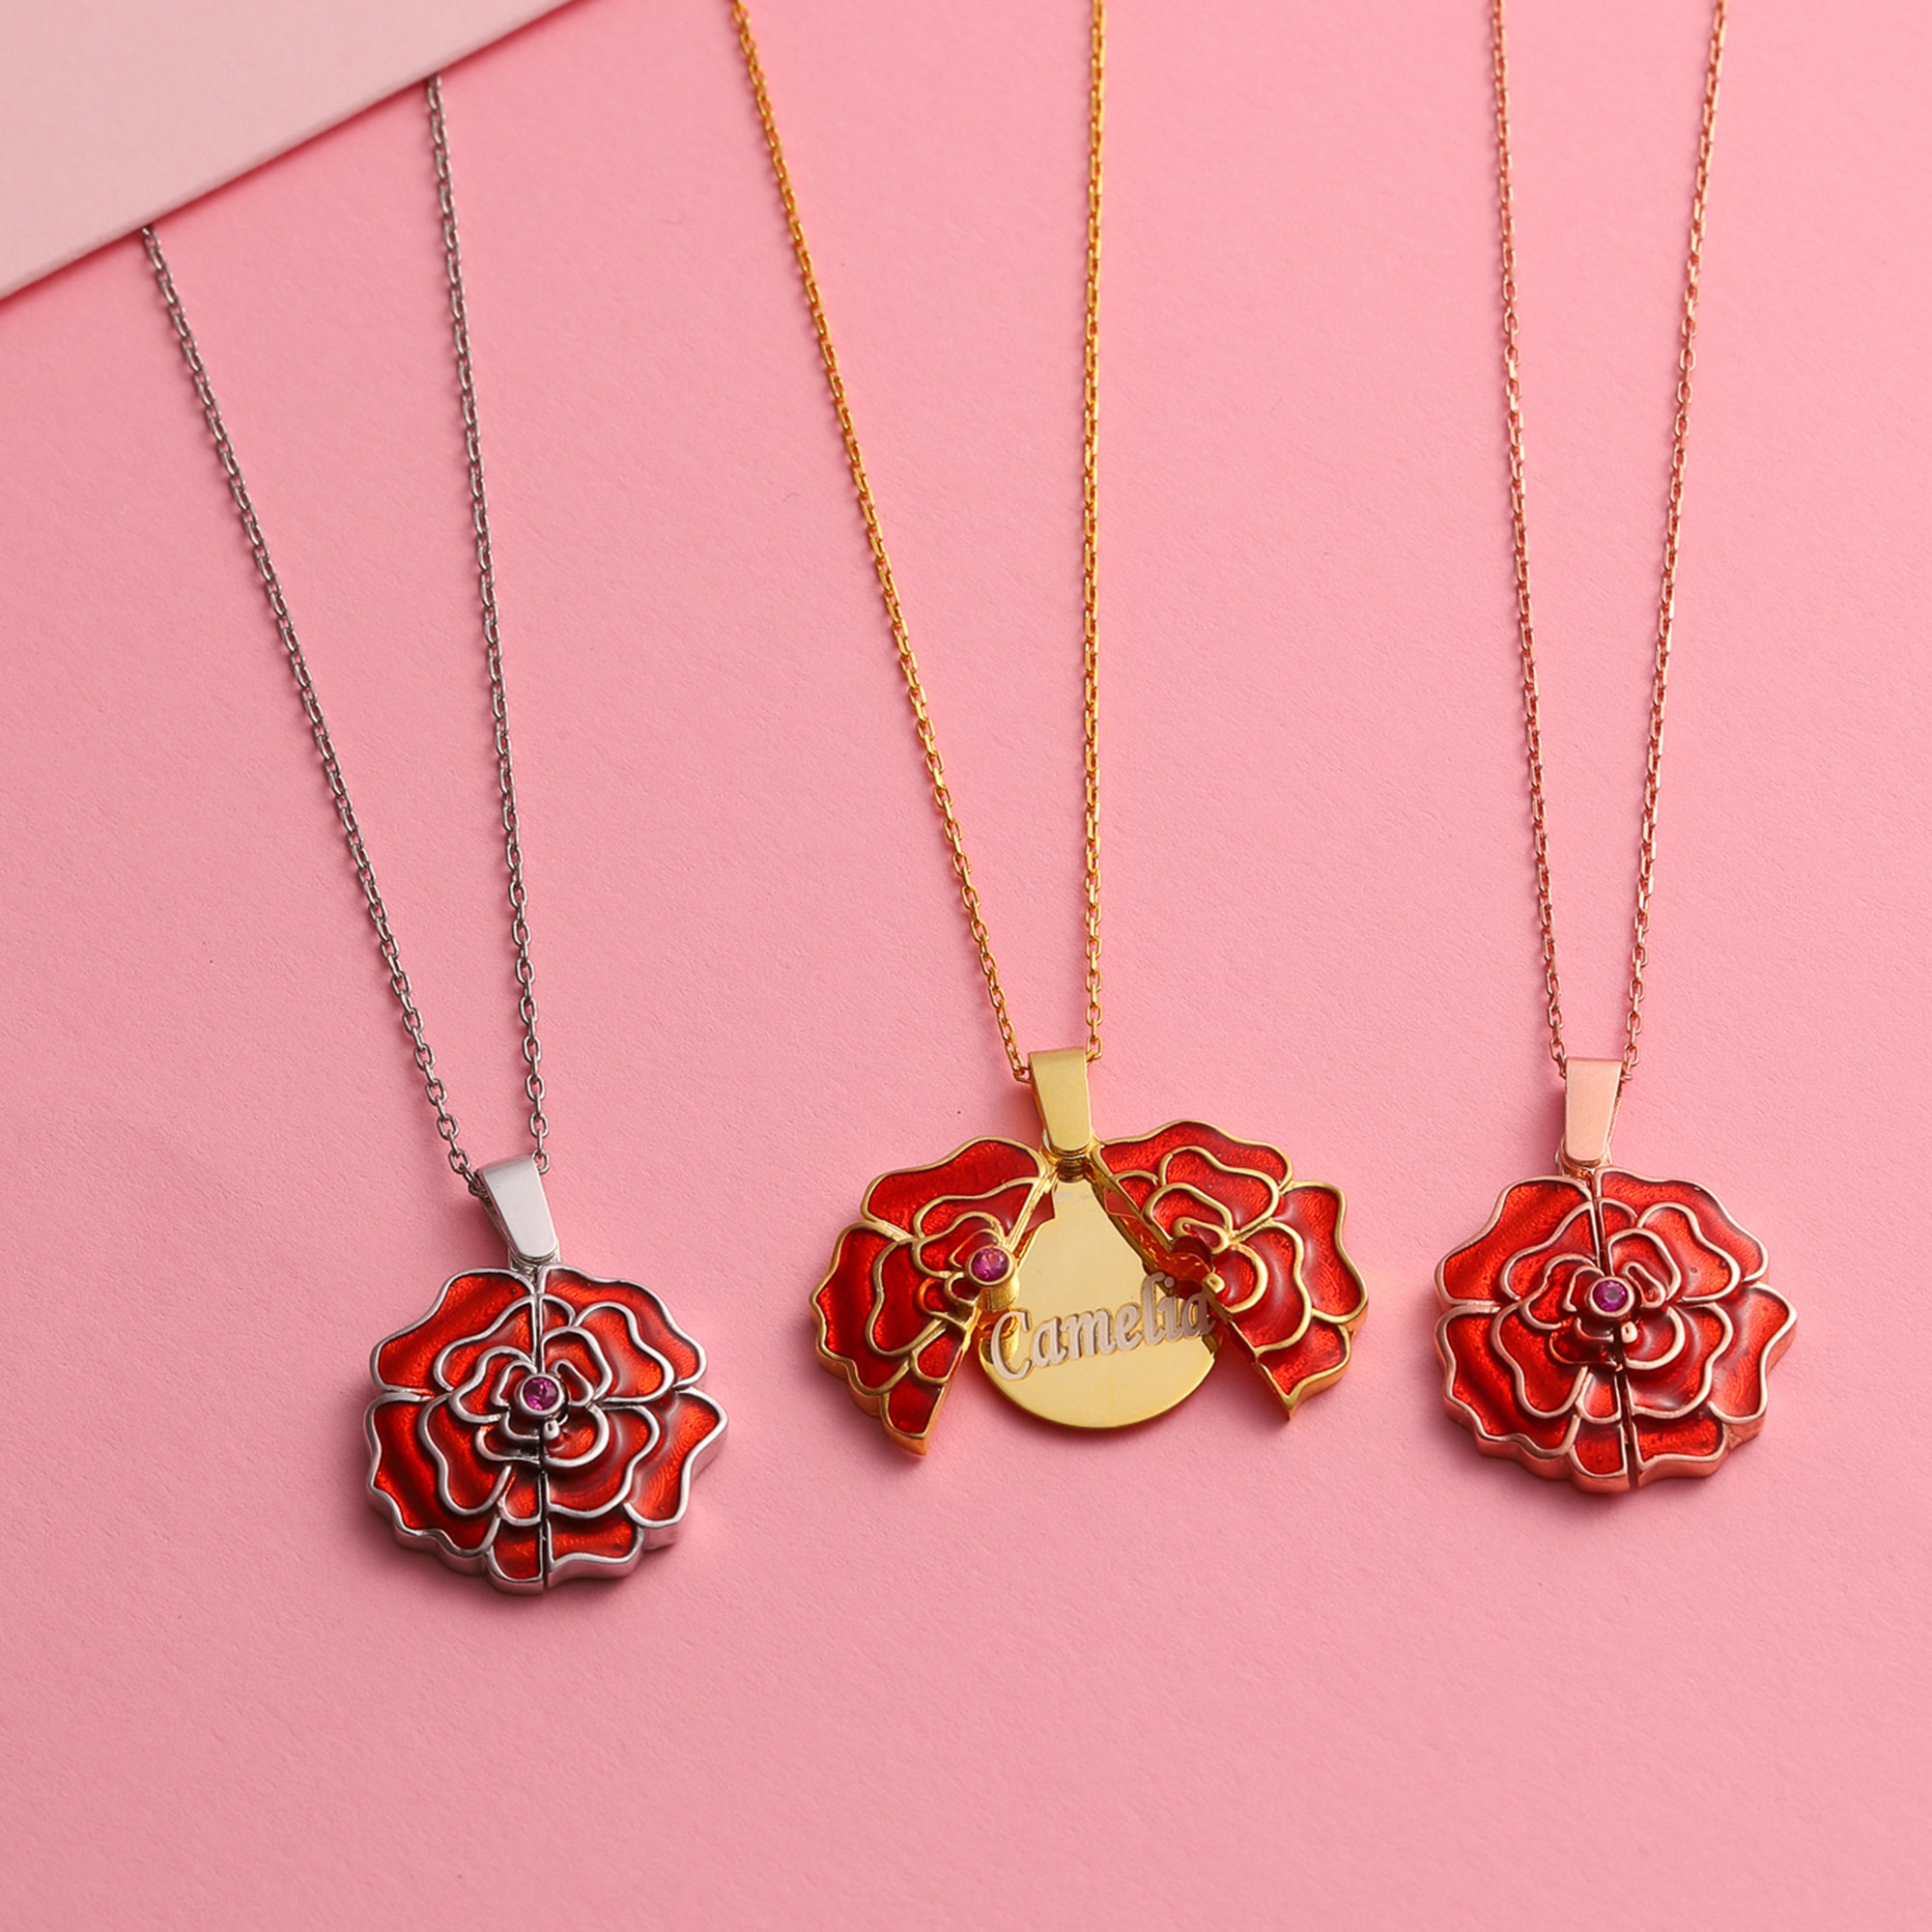 "Personalized Customized Necklace" Red Rose Delicate Petal Necklace-BUNNYKACHU